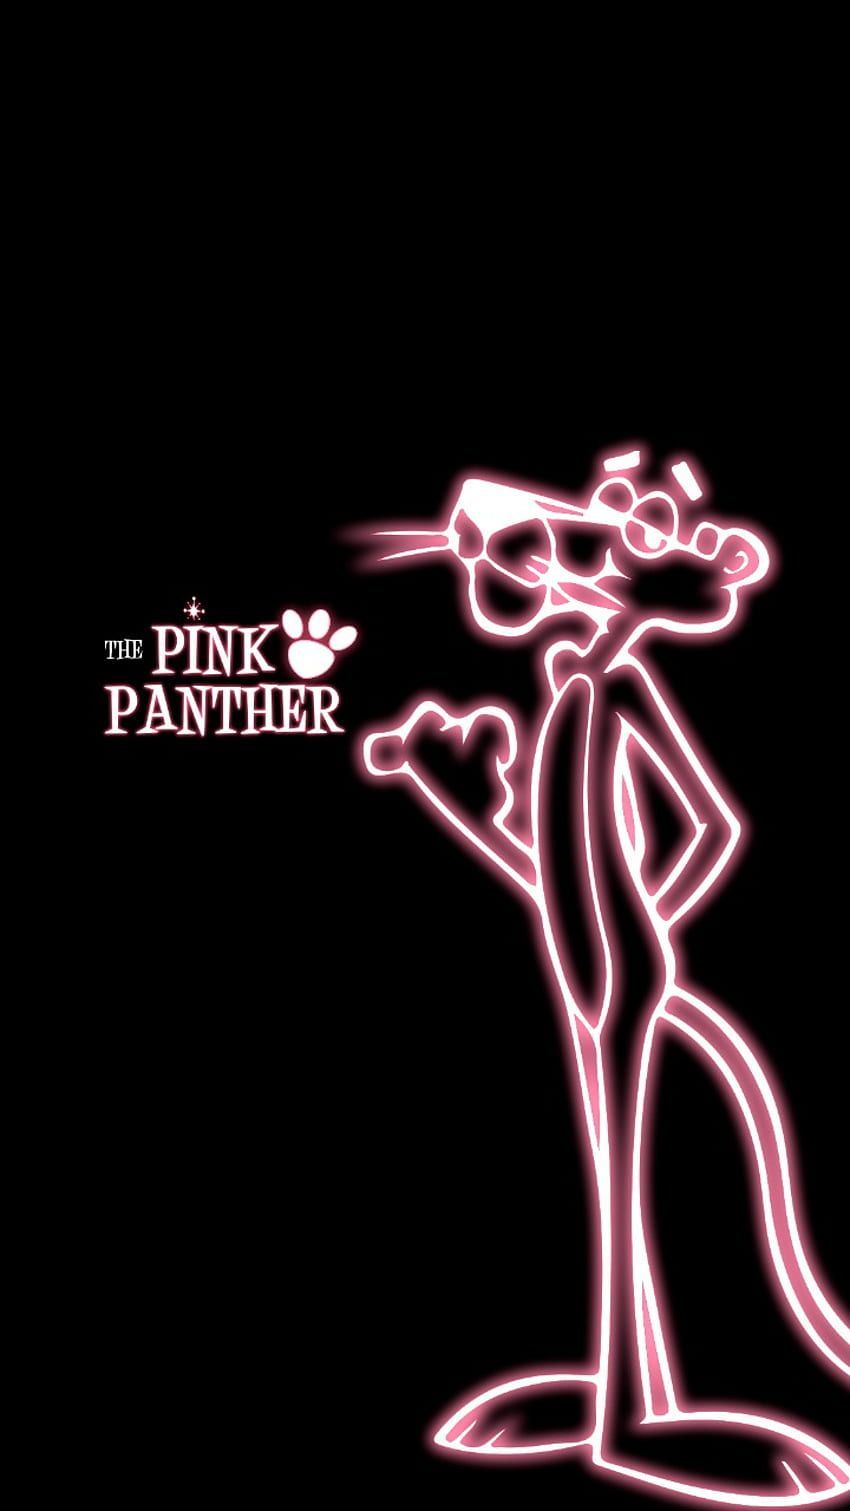 The Pink Panther wallpaper for iPhone 6+ - Pink Panther